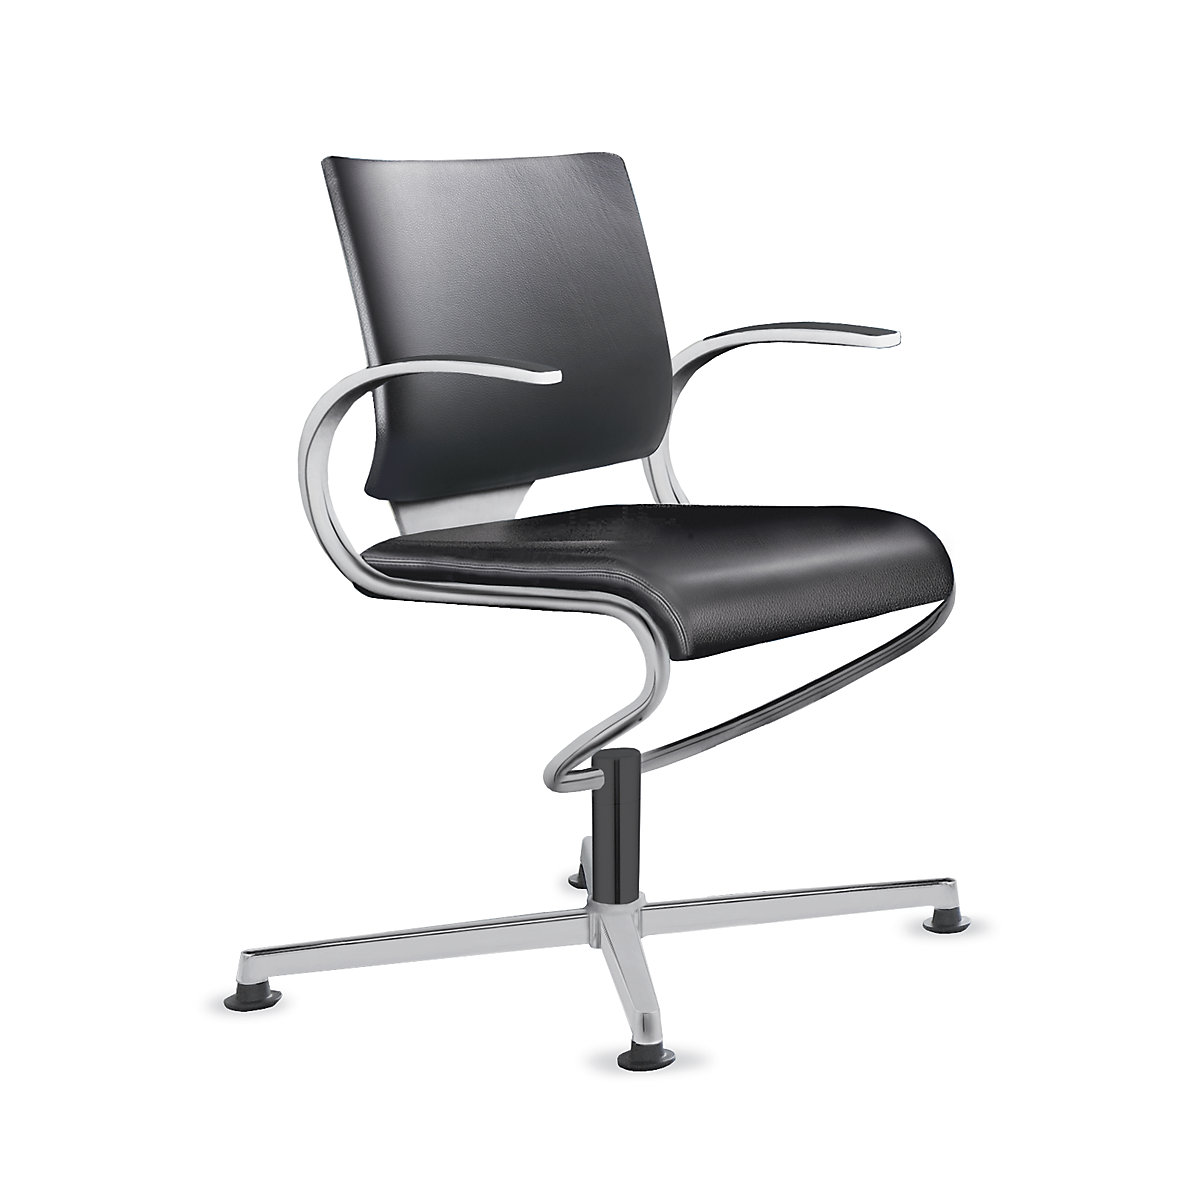 InTouch conference swivel chair – Dauphin